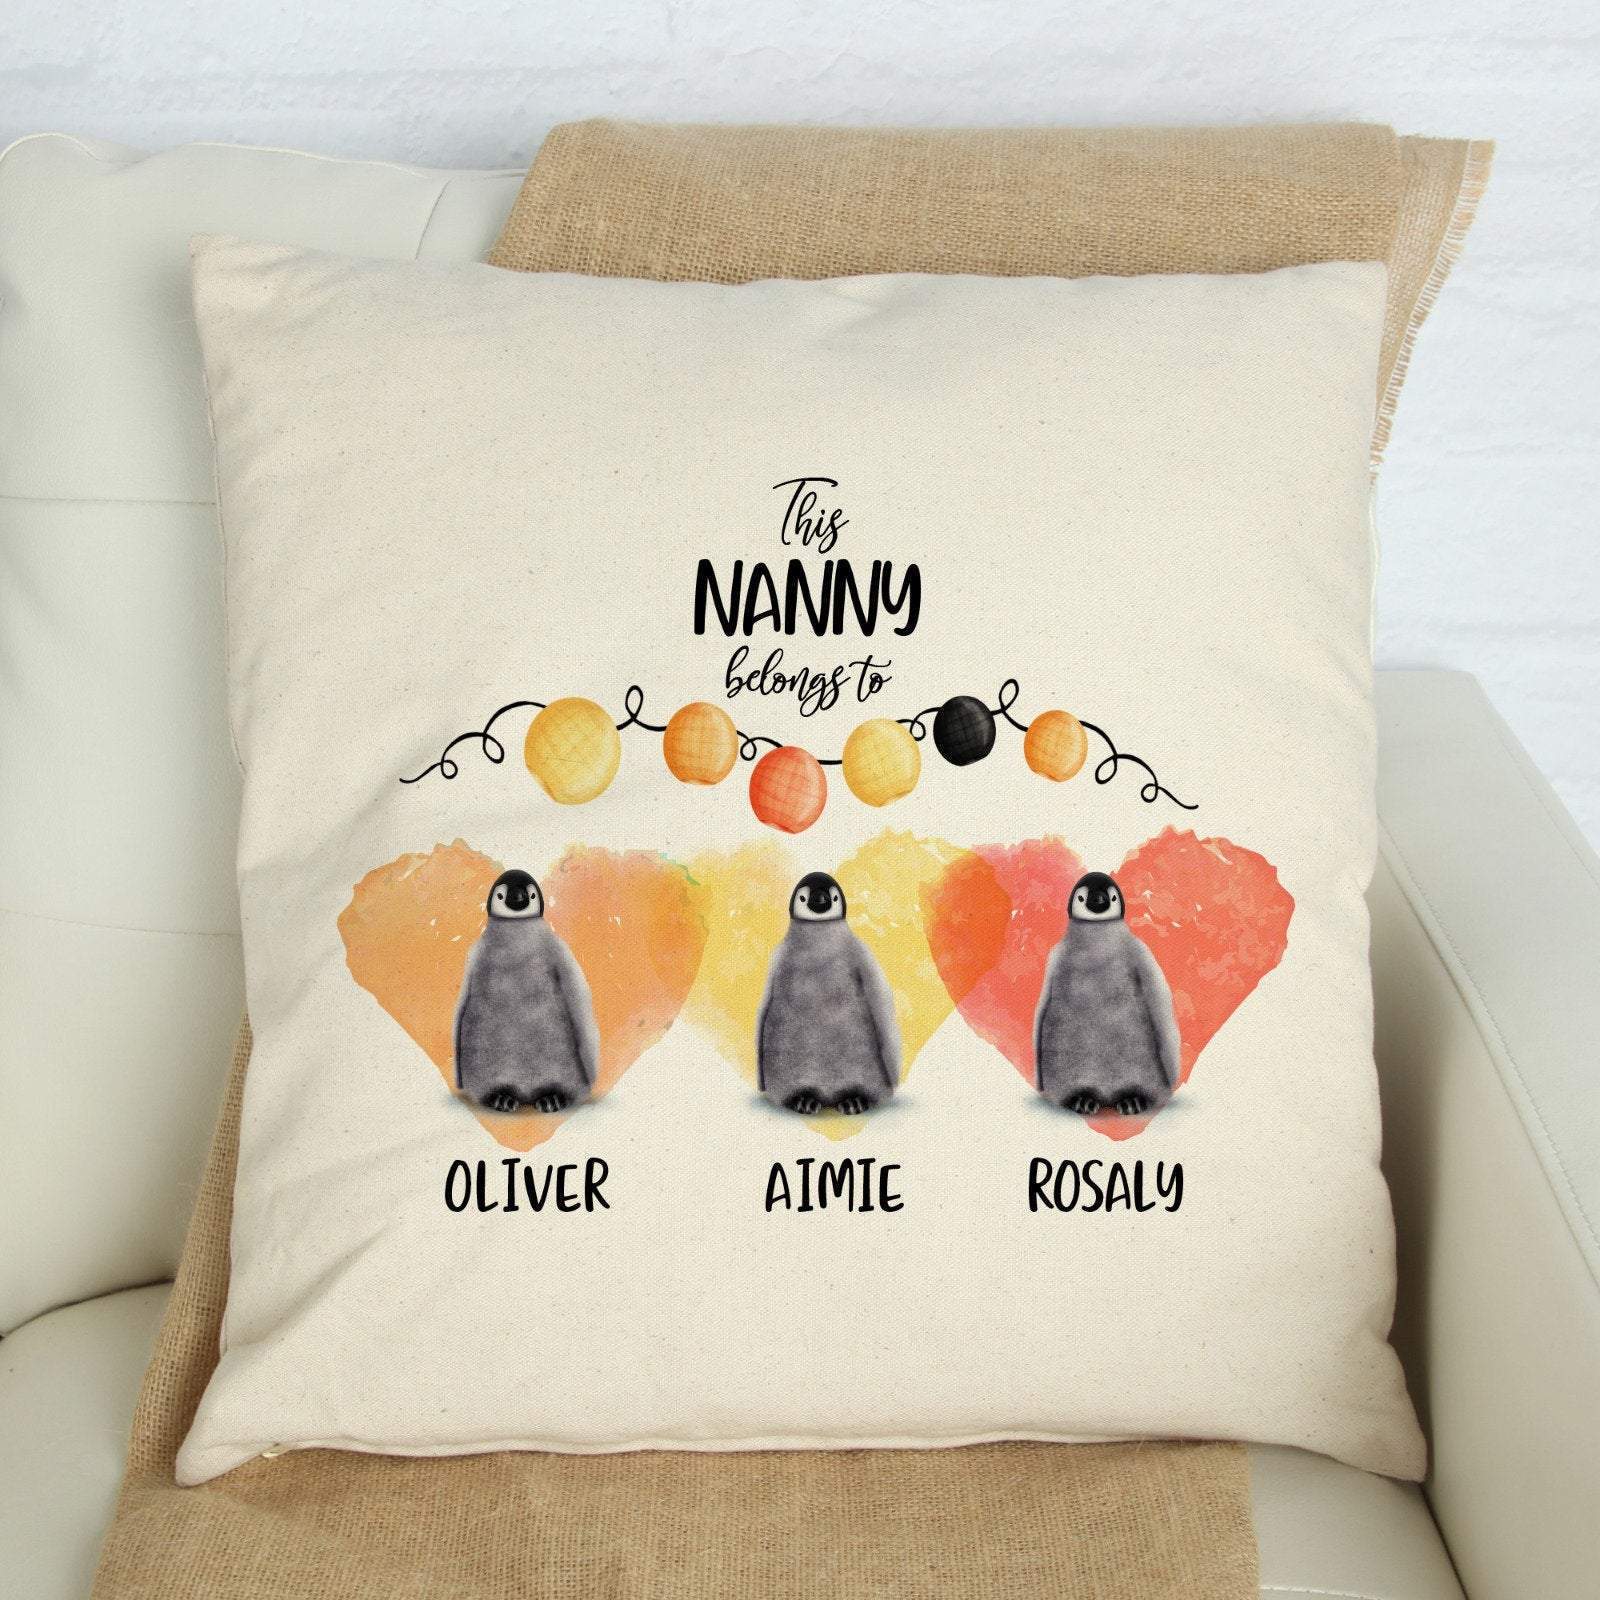 This Nanny belong to cushion cover with grandchildren names,Personalised grandma gift